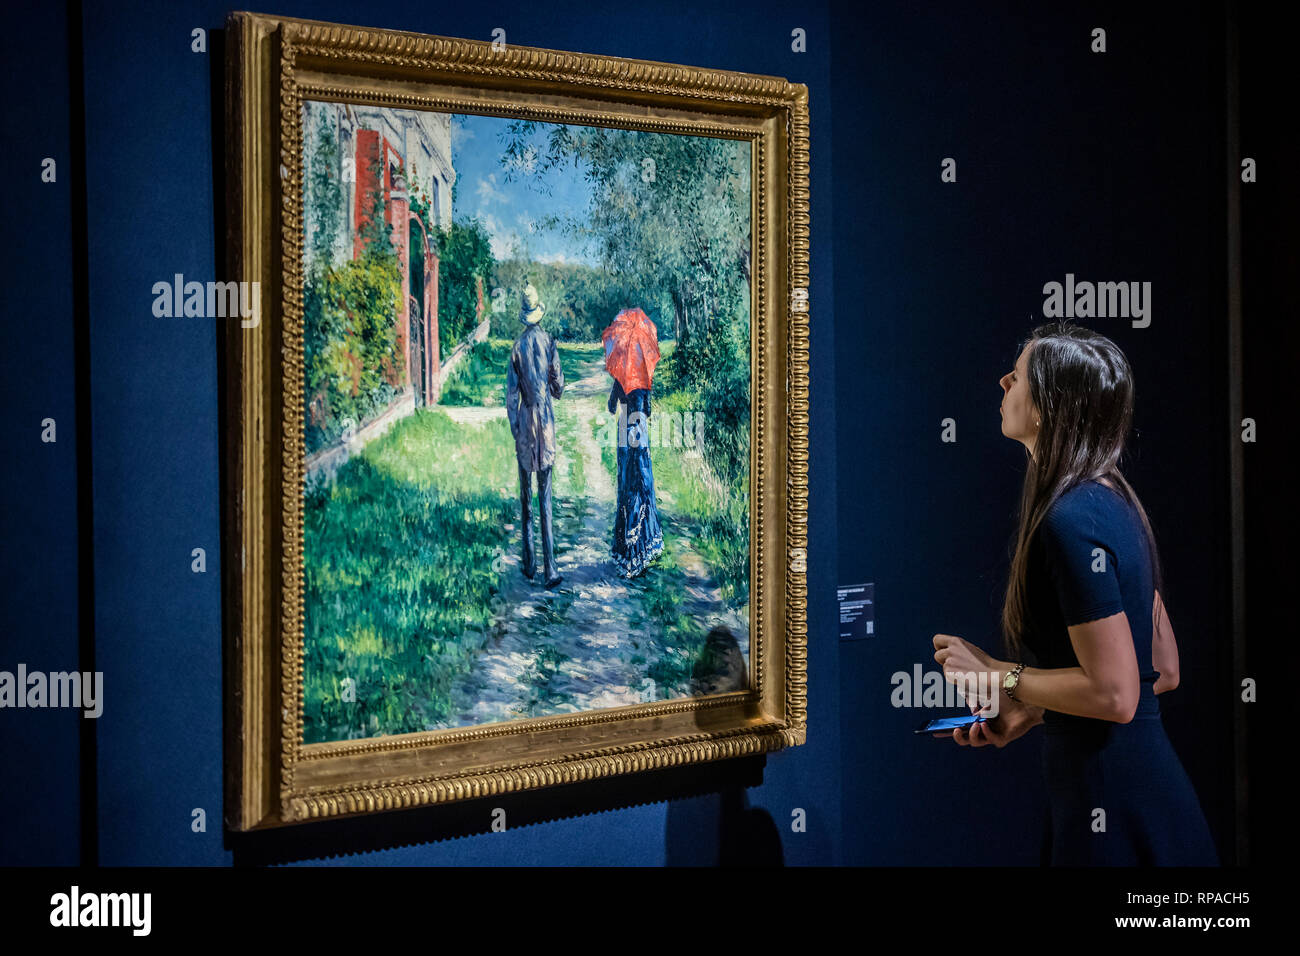 London, UK. 21st Feb, 2019. Gustave Caillebotte (1848-1894) chemin montant, est £8m+ - Christie’s presents an exhibition of works from its upcoming Impressionist & Modern Art and The Art Of The Surreal Sales which will take place on 27 Feb at Christie’s King Street. Credit: Guy Bell/Alamy Live News Stock Photo